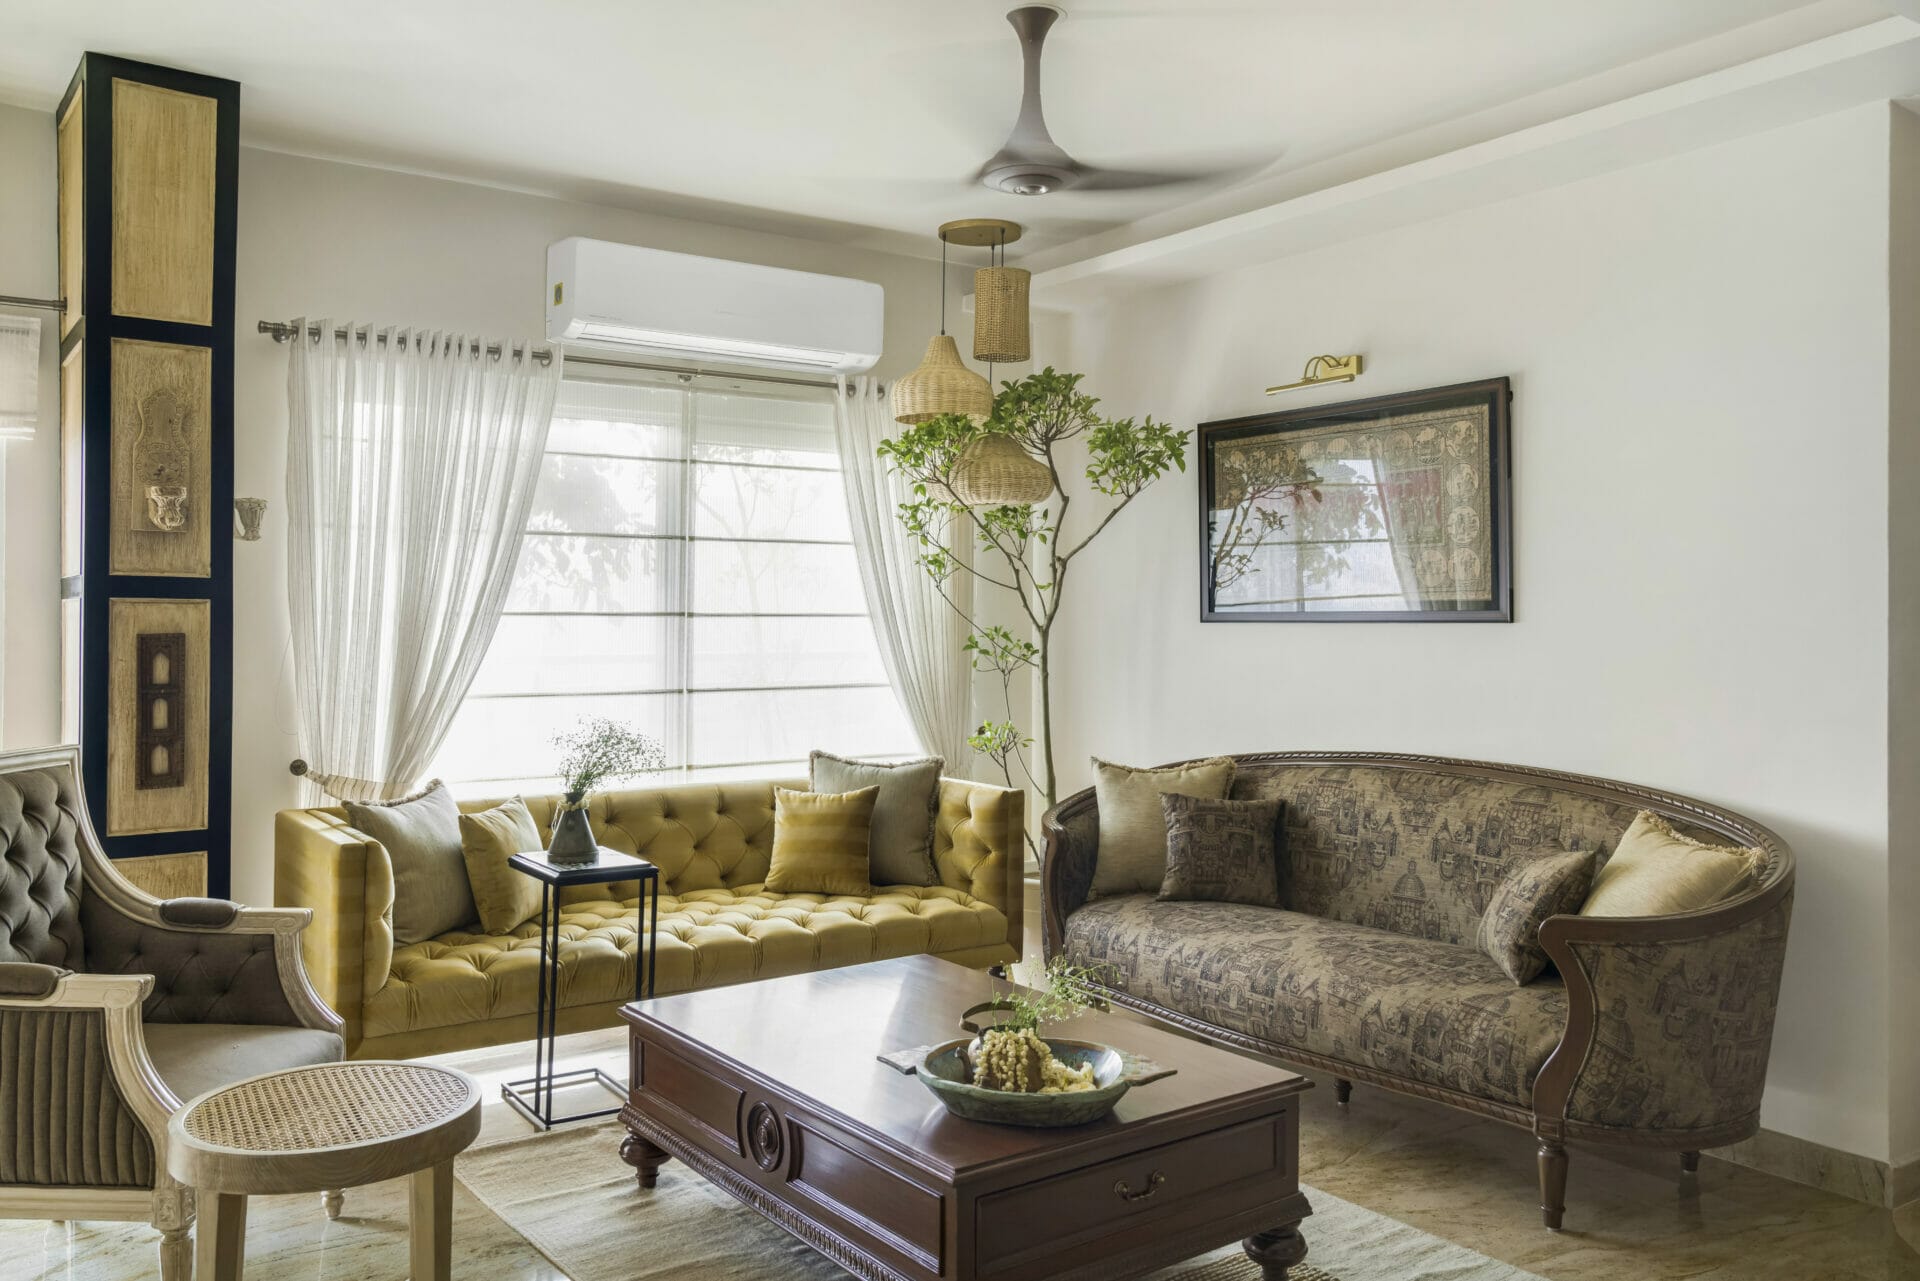 2700 Sq Ft Noida Luxury Apartment Blends Tradition, French Style, and Modern Luxury with Scenic Farmland Views